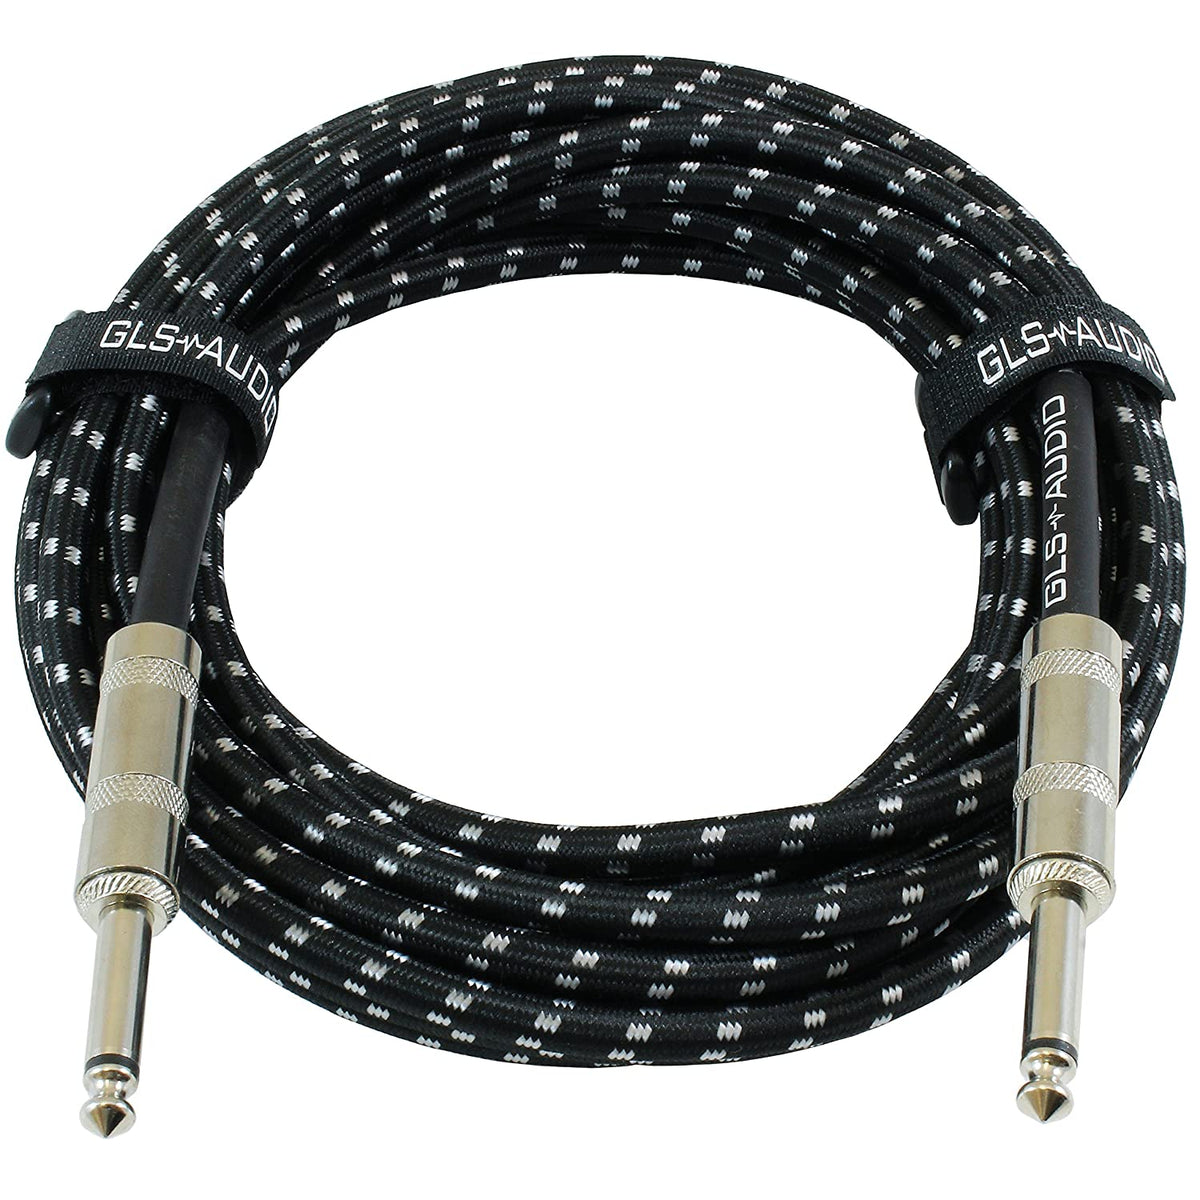 Audio Instrument Cable Guitar Audio Cable Electric Guitar Cable